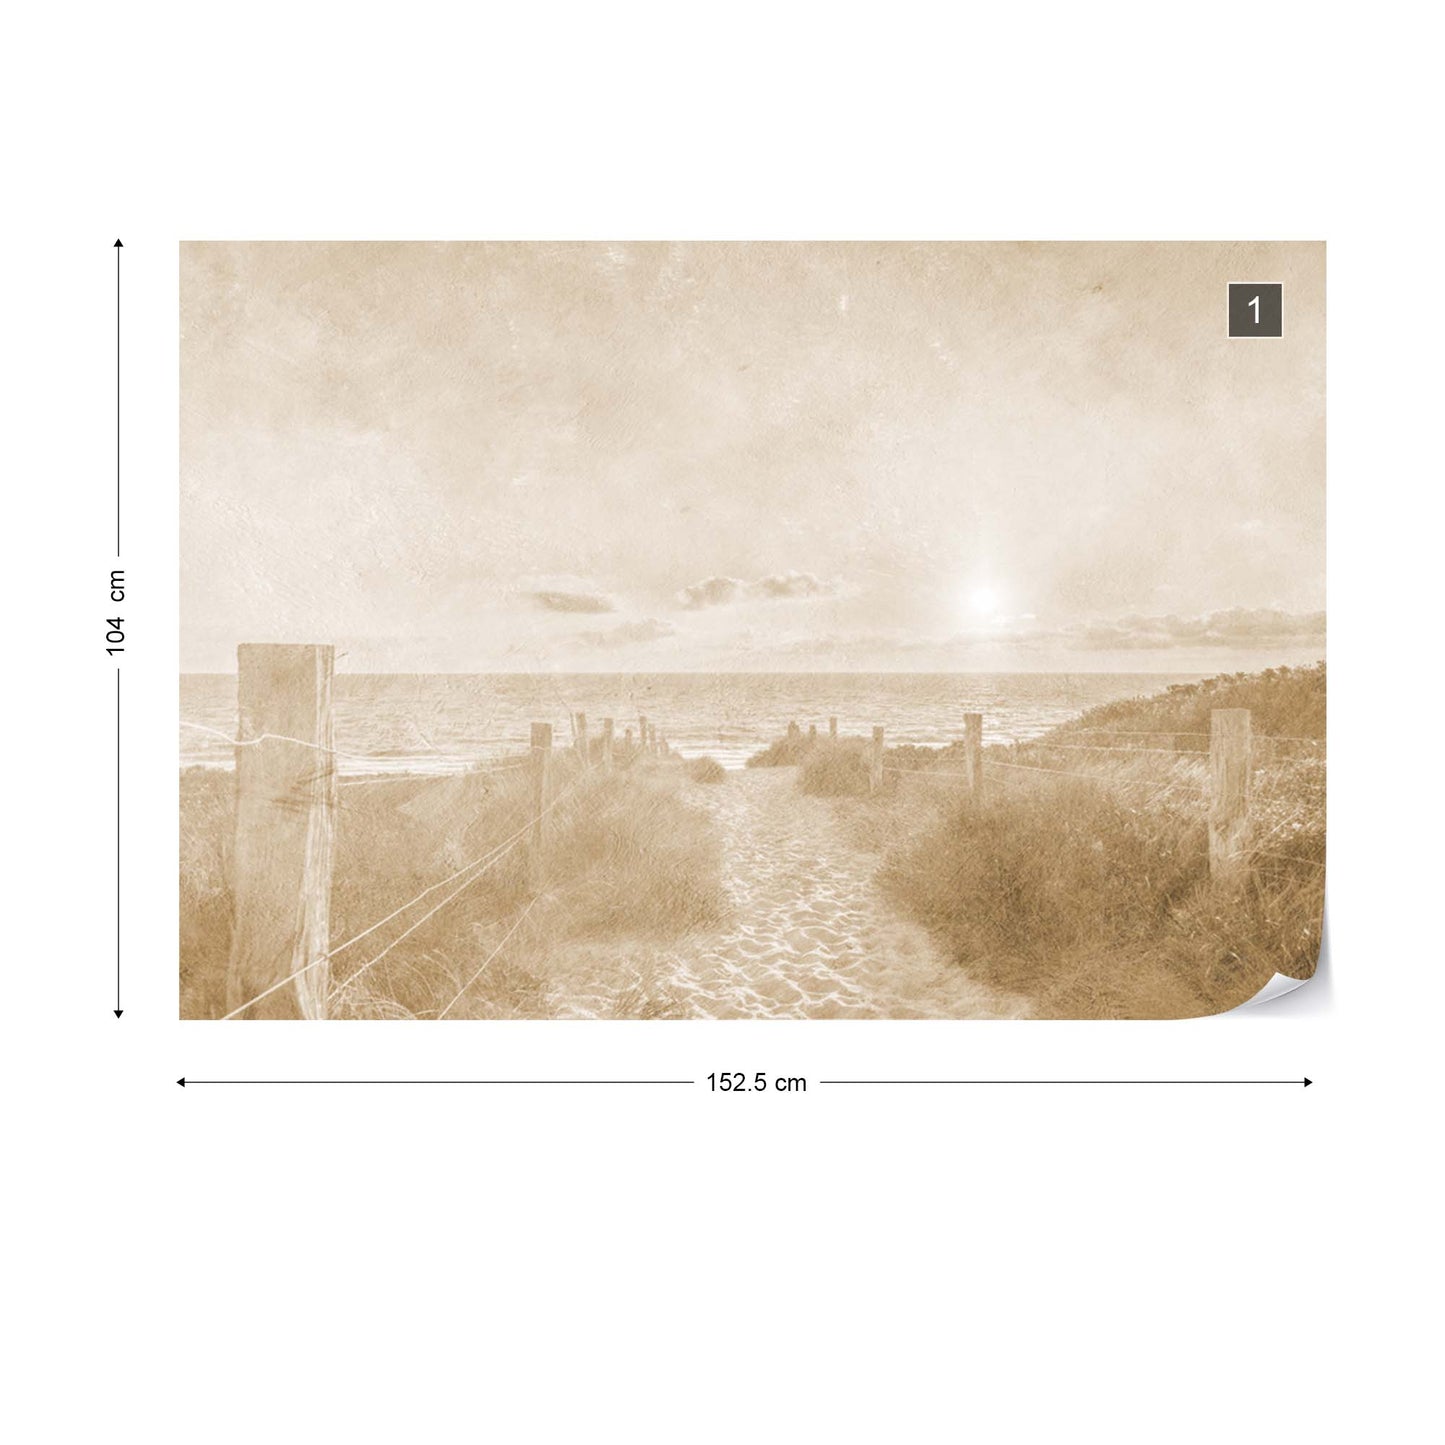 Summer Sunset Faded Vintage Sepia Wallpaper Waterproof for Rooms Bathroom Kitchen - USTAD HOME